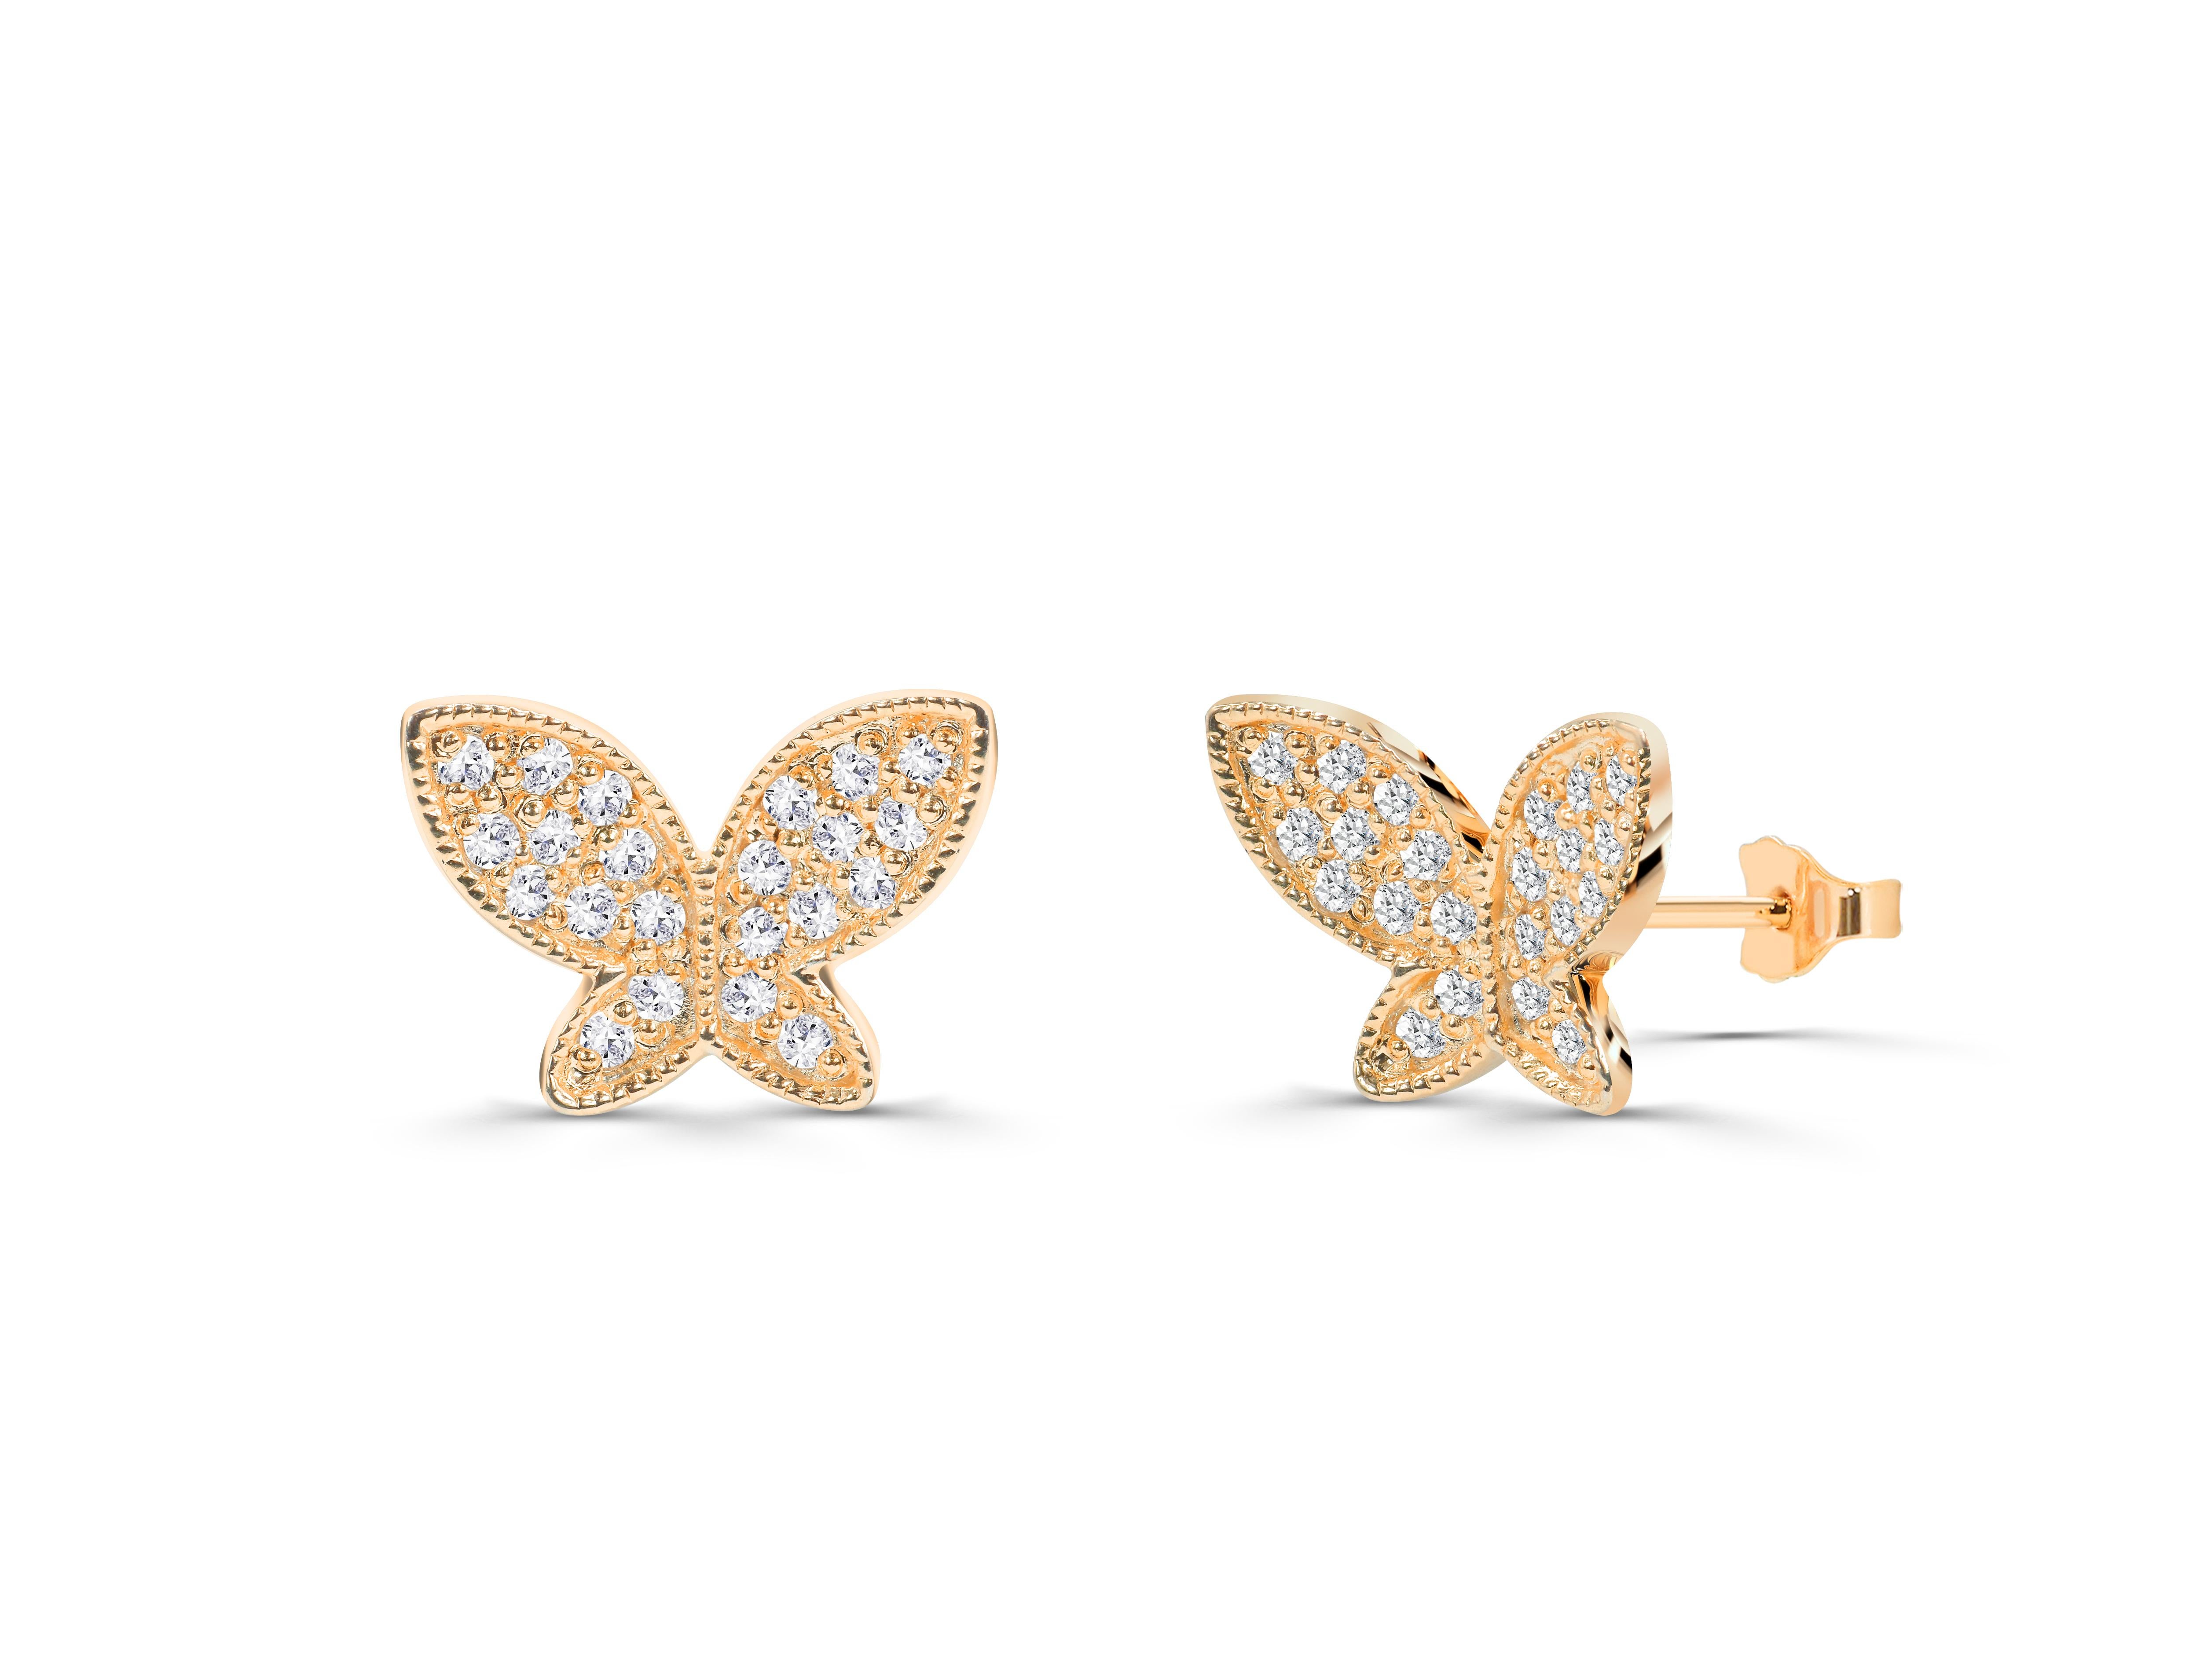 Minimalist Gold Butterfly stud earrings/ Butterfly studs/ Kids jewelry / Gold studs/ Dainty earrings/ Gifts for her

butterfly earrings, butterfly studs, Handmade jewelry, Bridesmaid gifts, Diamond earrings, christmas gift, gifts for women, gold